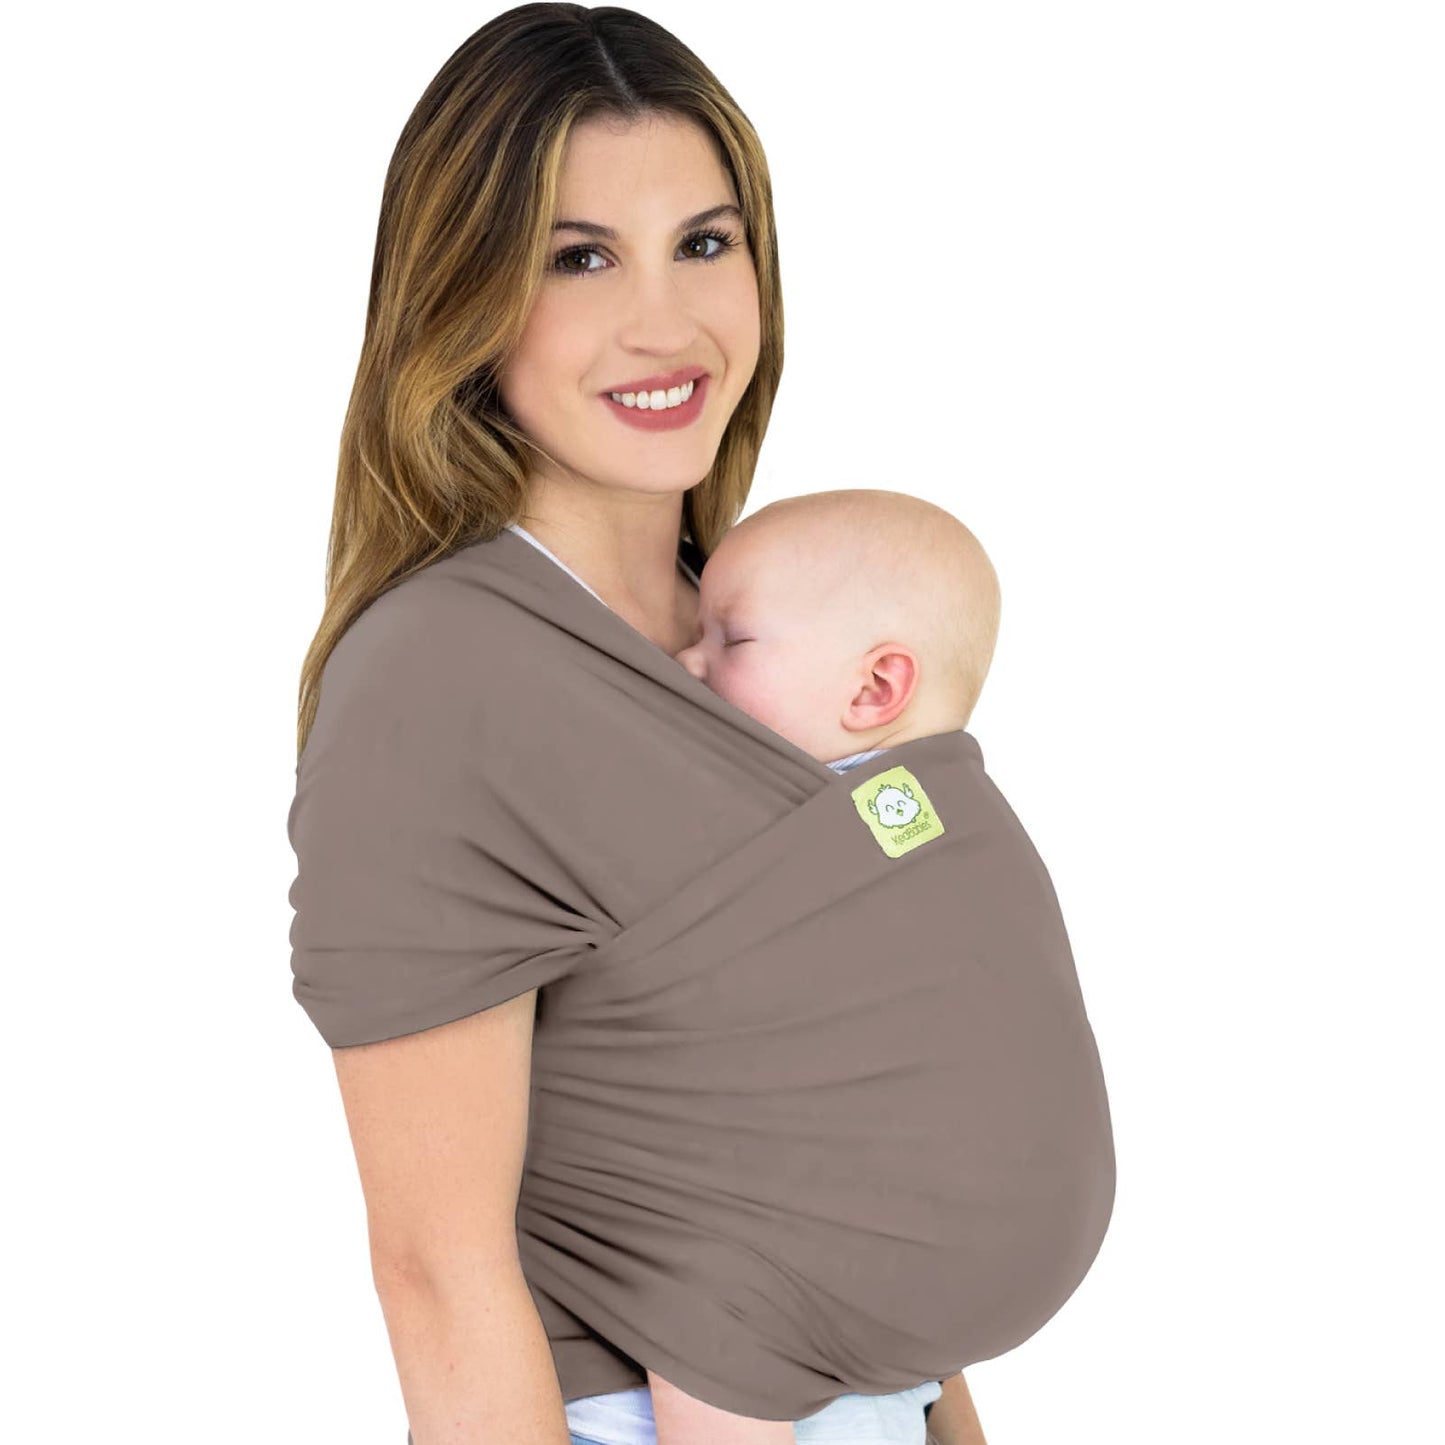 KeaBabies Baby Wrap Carrier (Copper Gray)